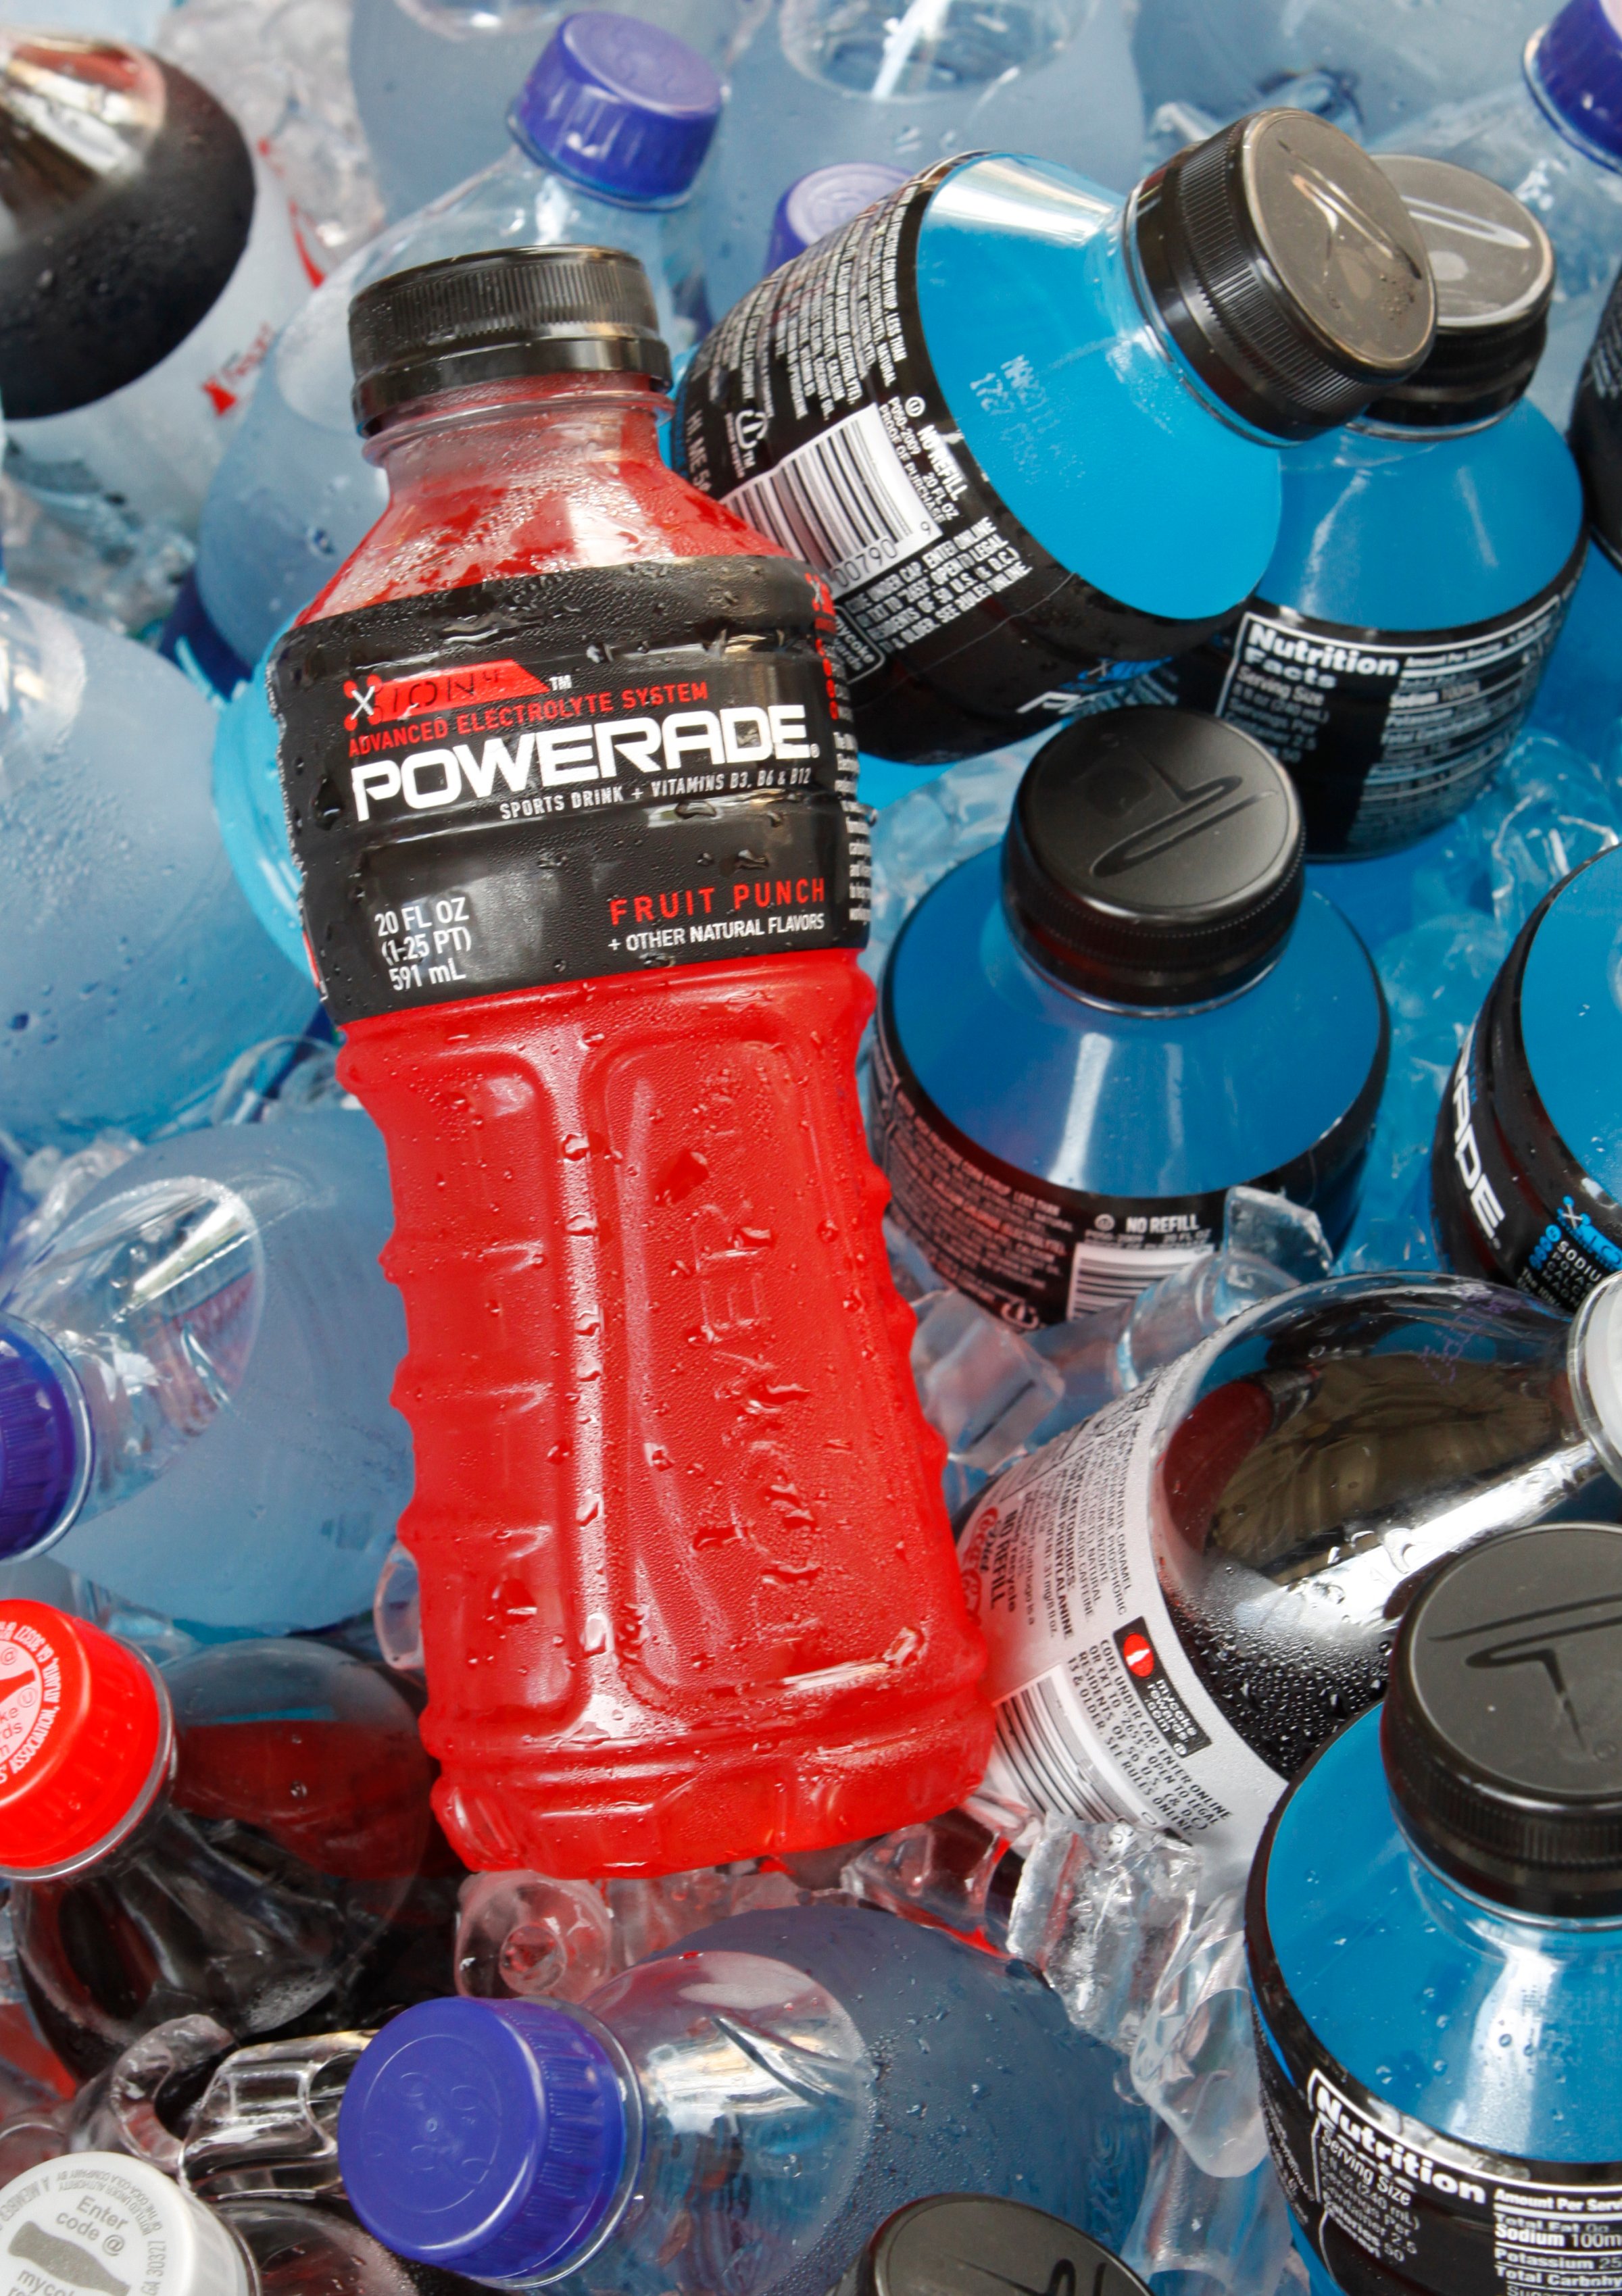 Bottles of Powerade and other Coca-Cola products in Orlando on Aug. 5, 2010.